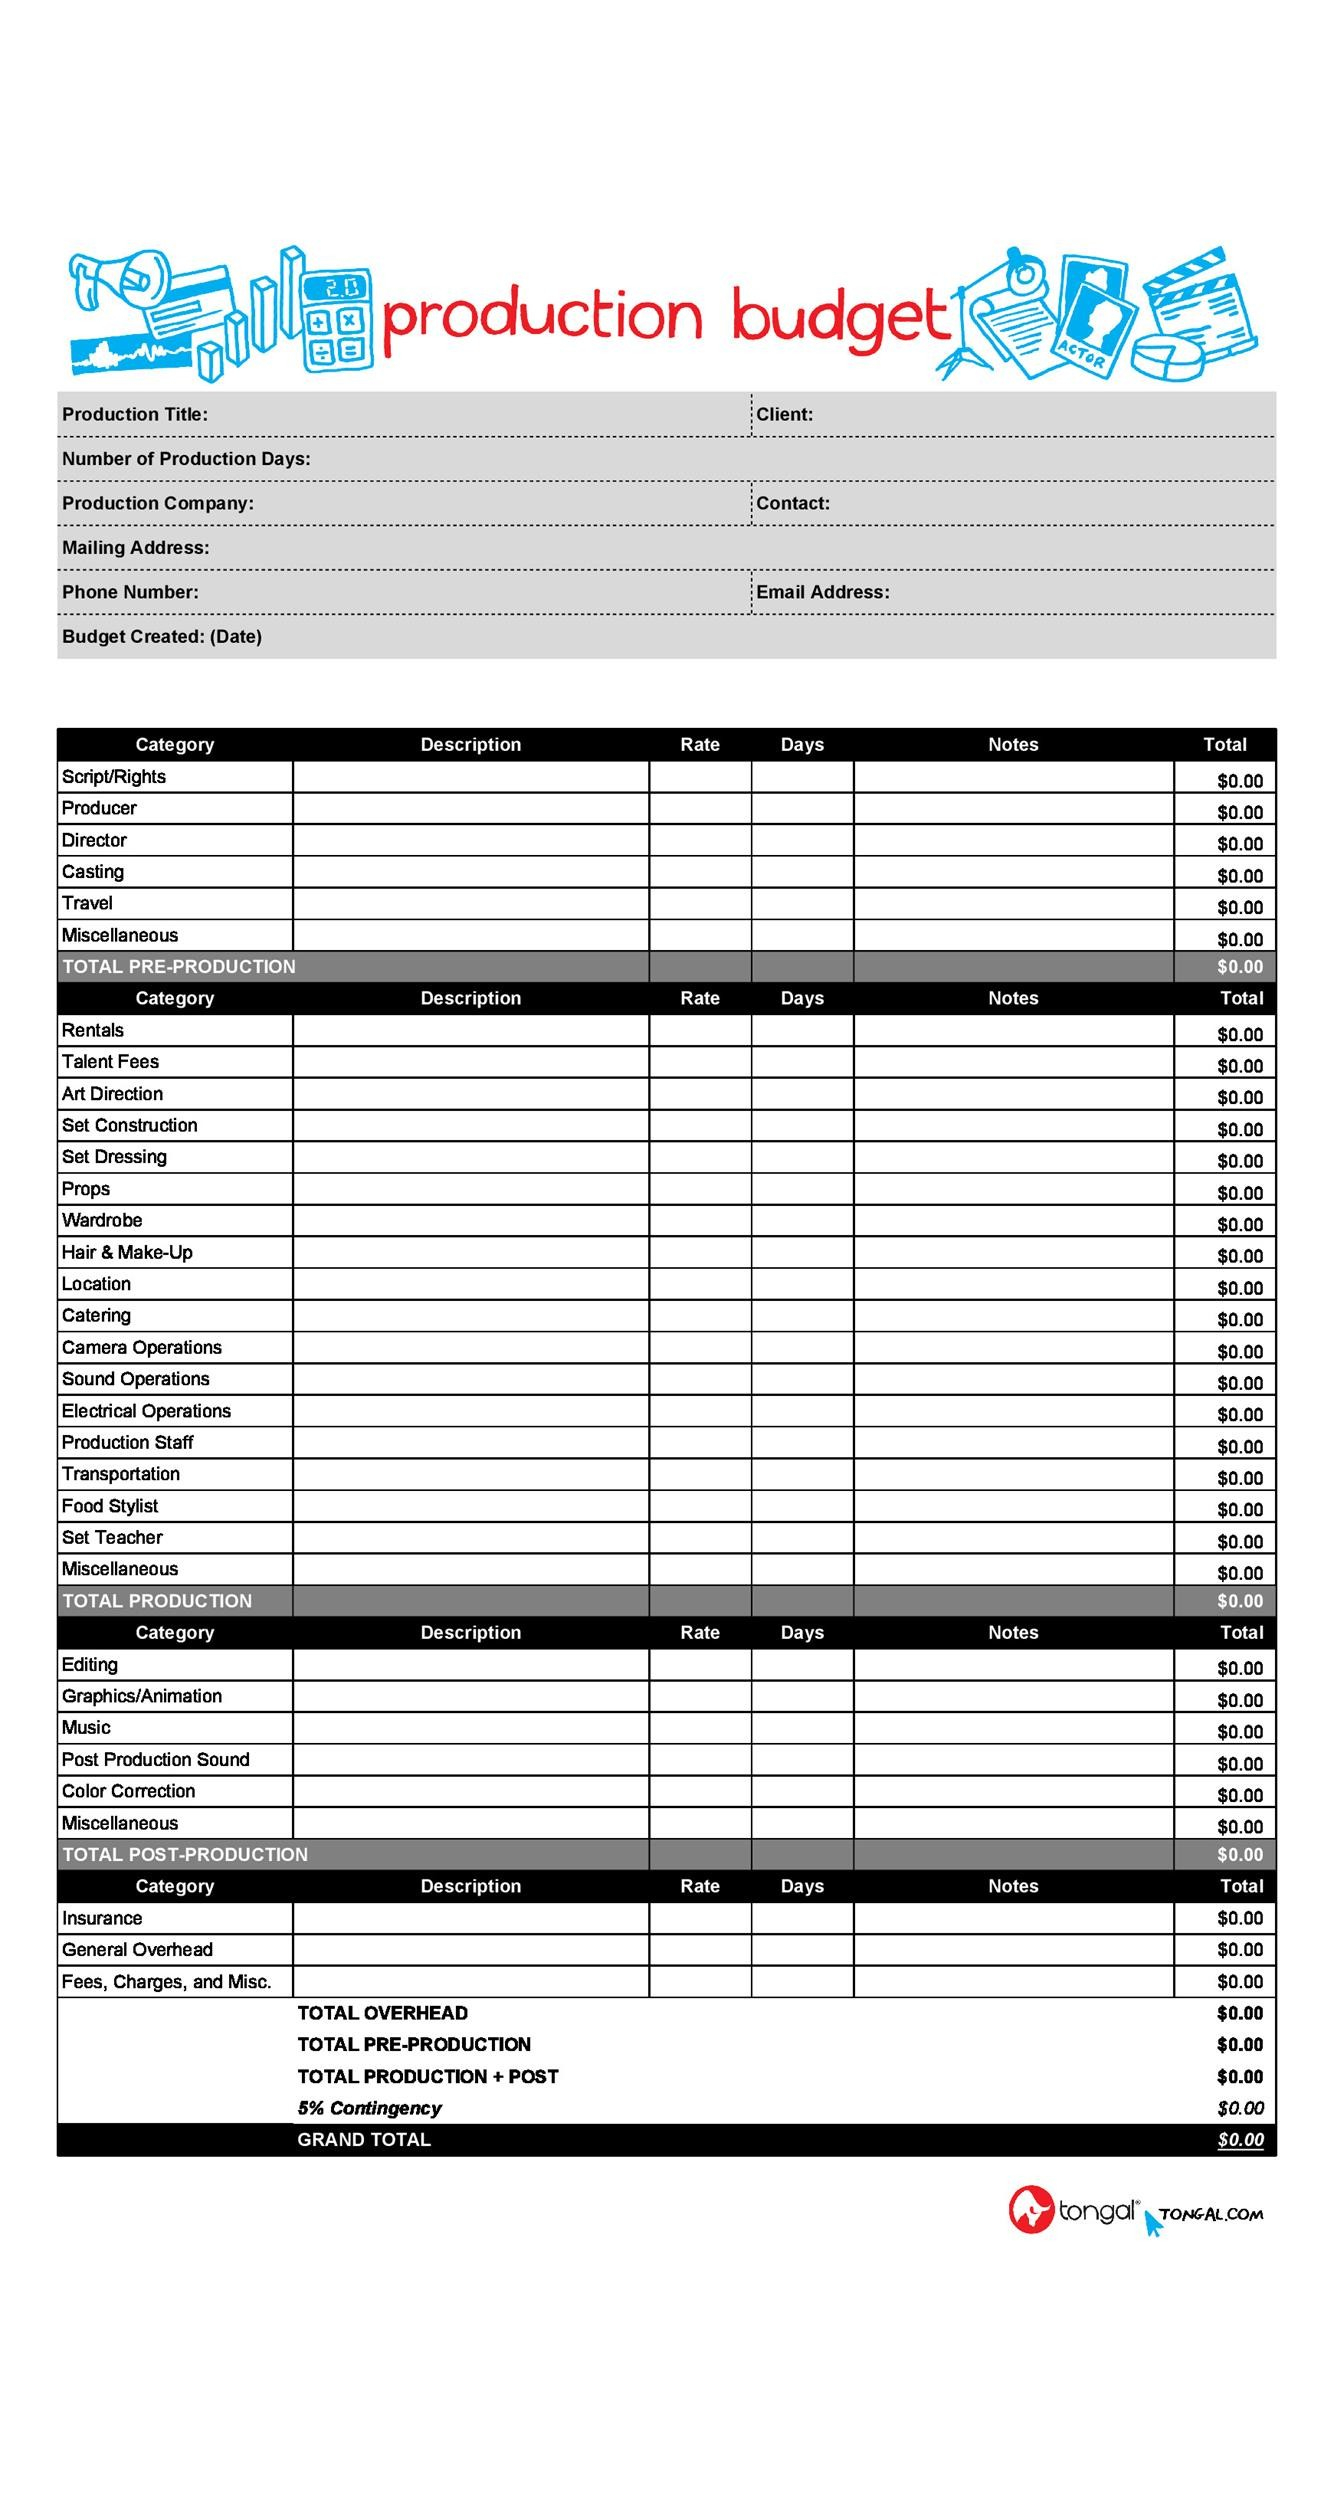 11 Free Film Budget Templates (Excel, Word) ᐅ TemplateLab Inside Documentary Film Budget Template Intended For Documentary Film Budget Template